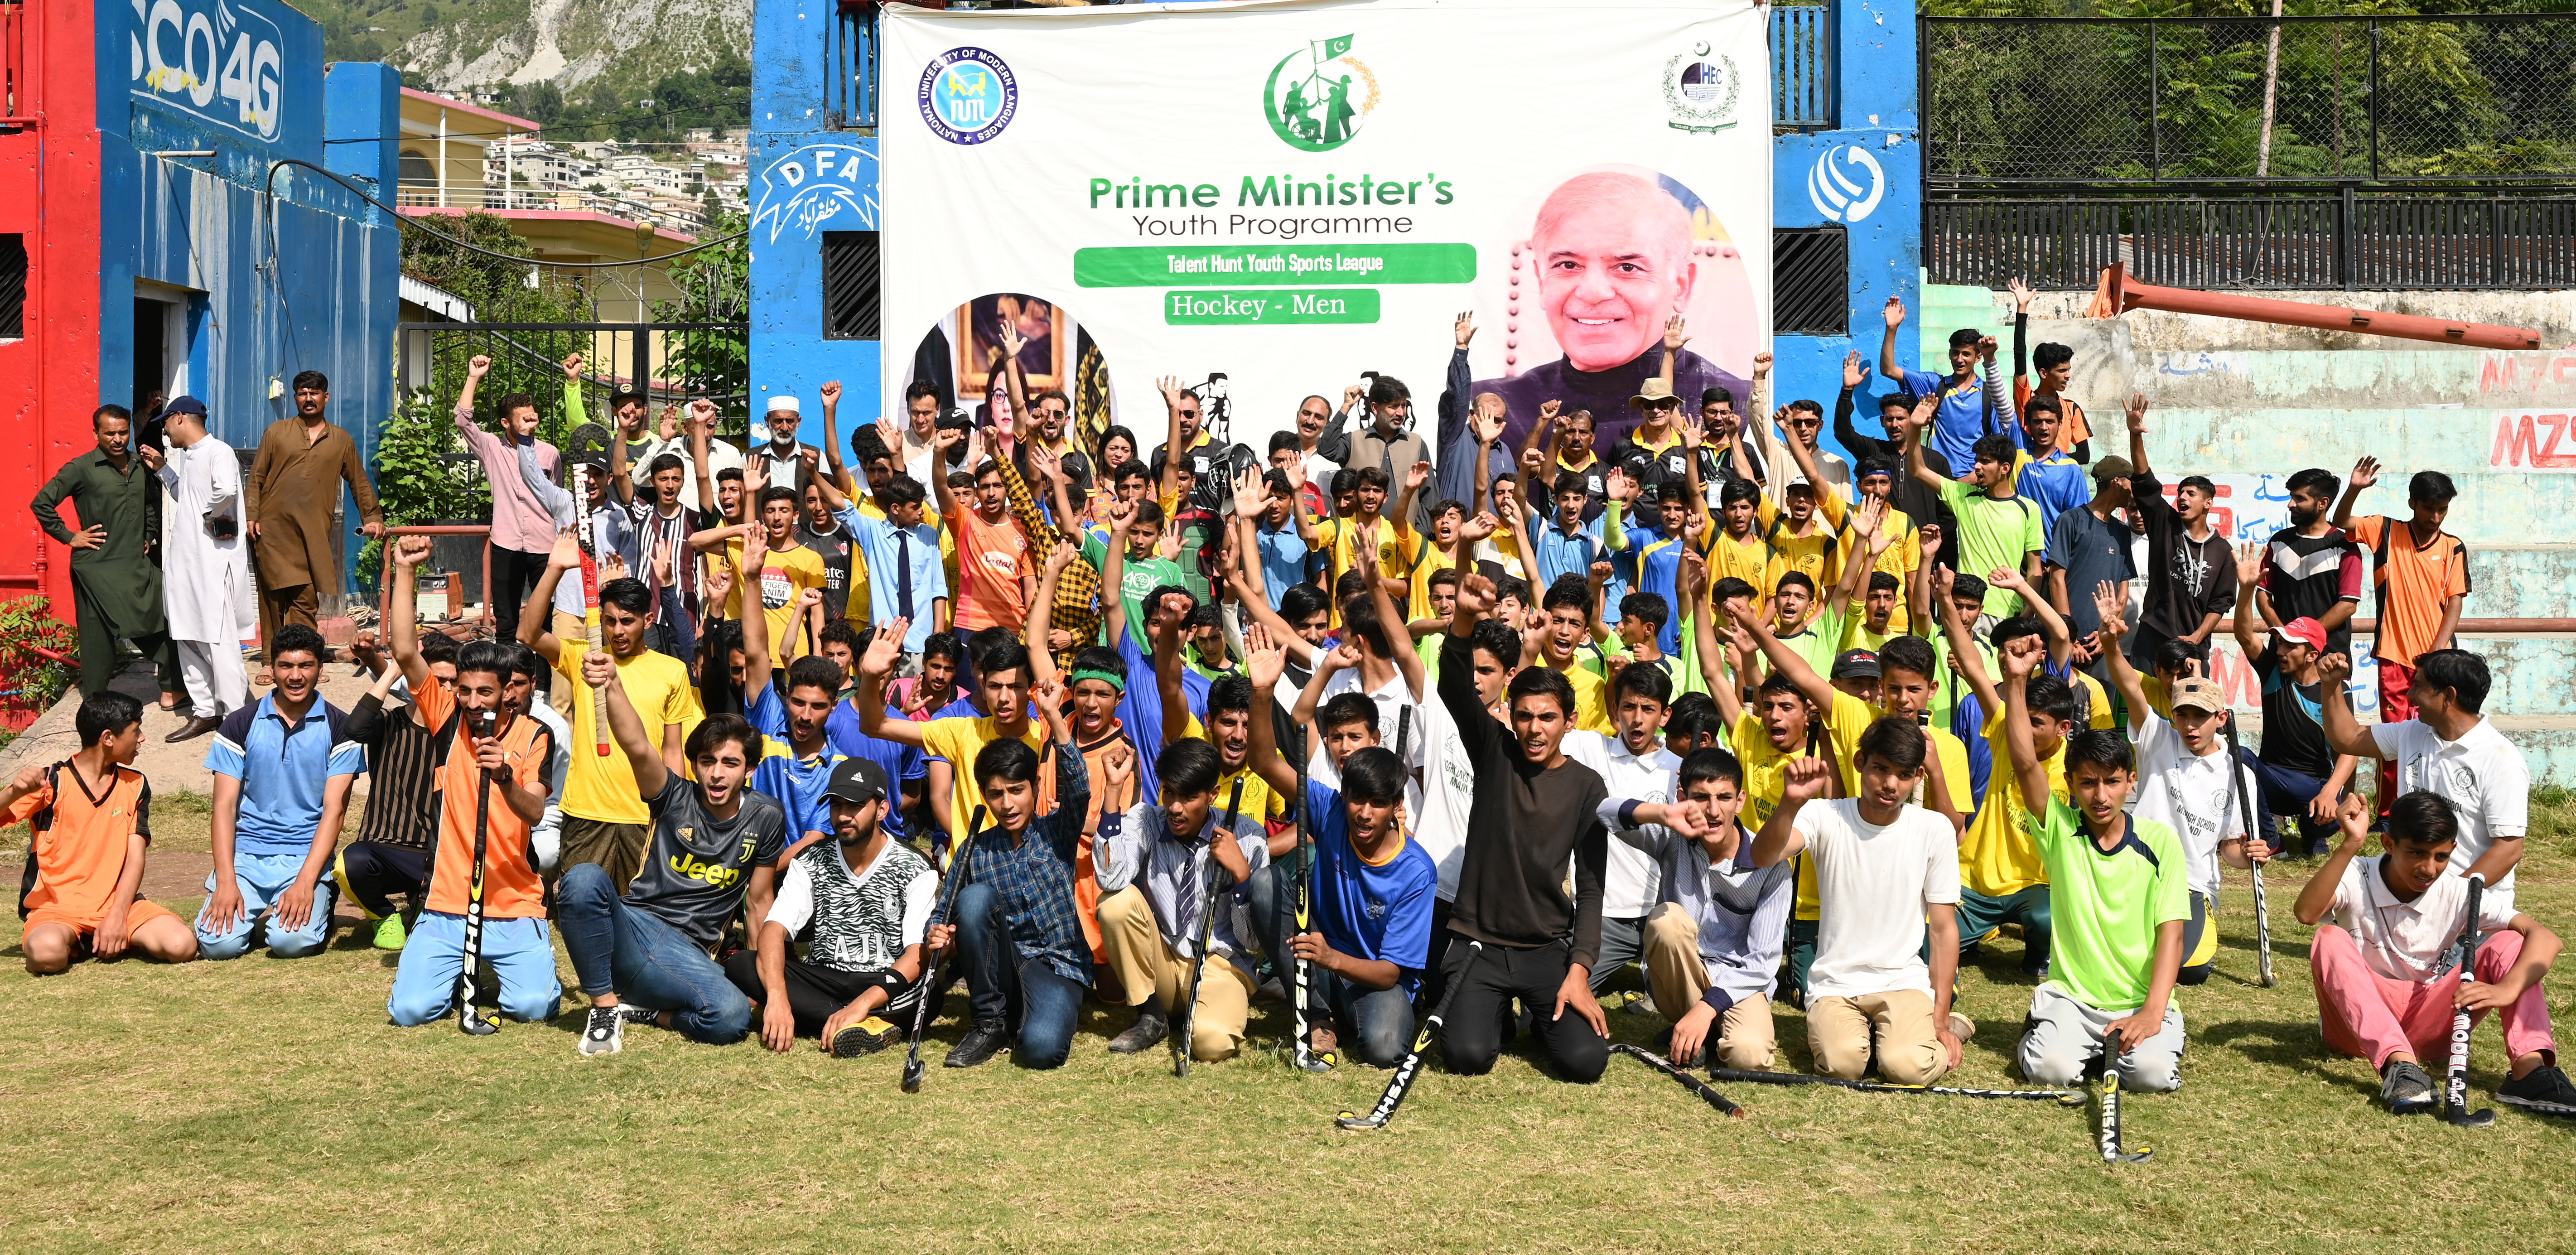 Prime Minister's Hockey Talent Hunt Youth Sports League started in Azad Jammu & Kashmir